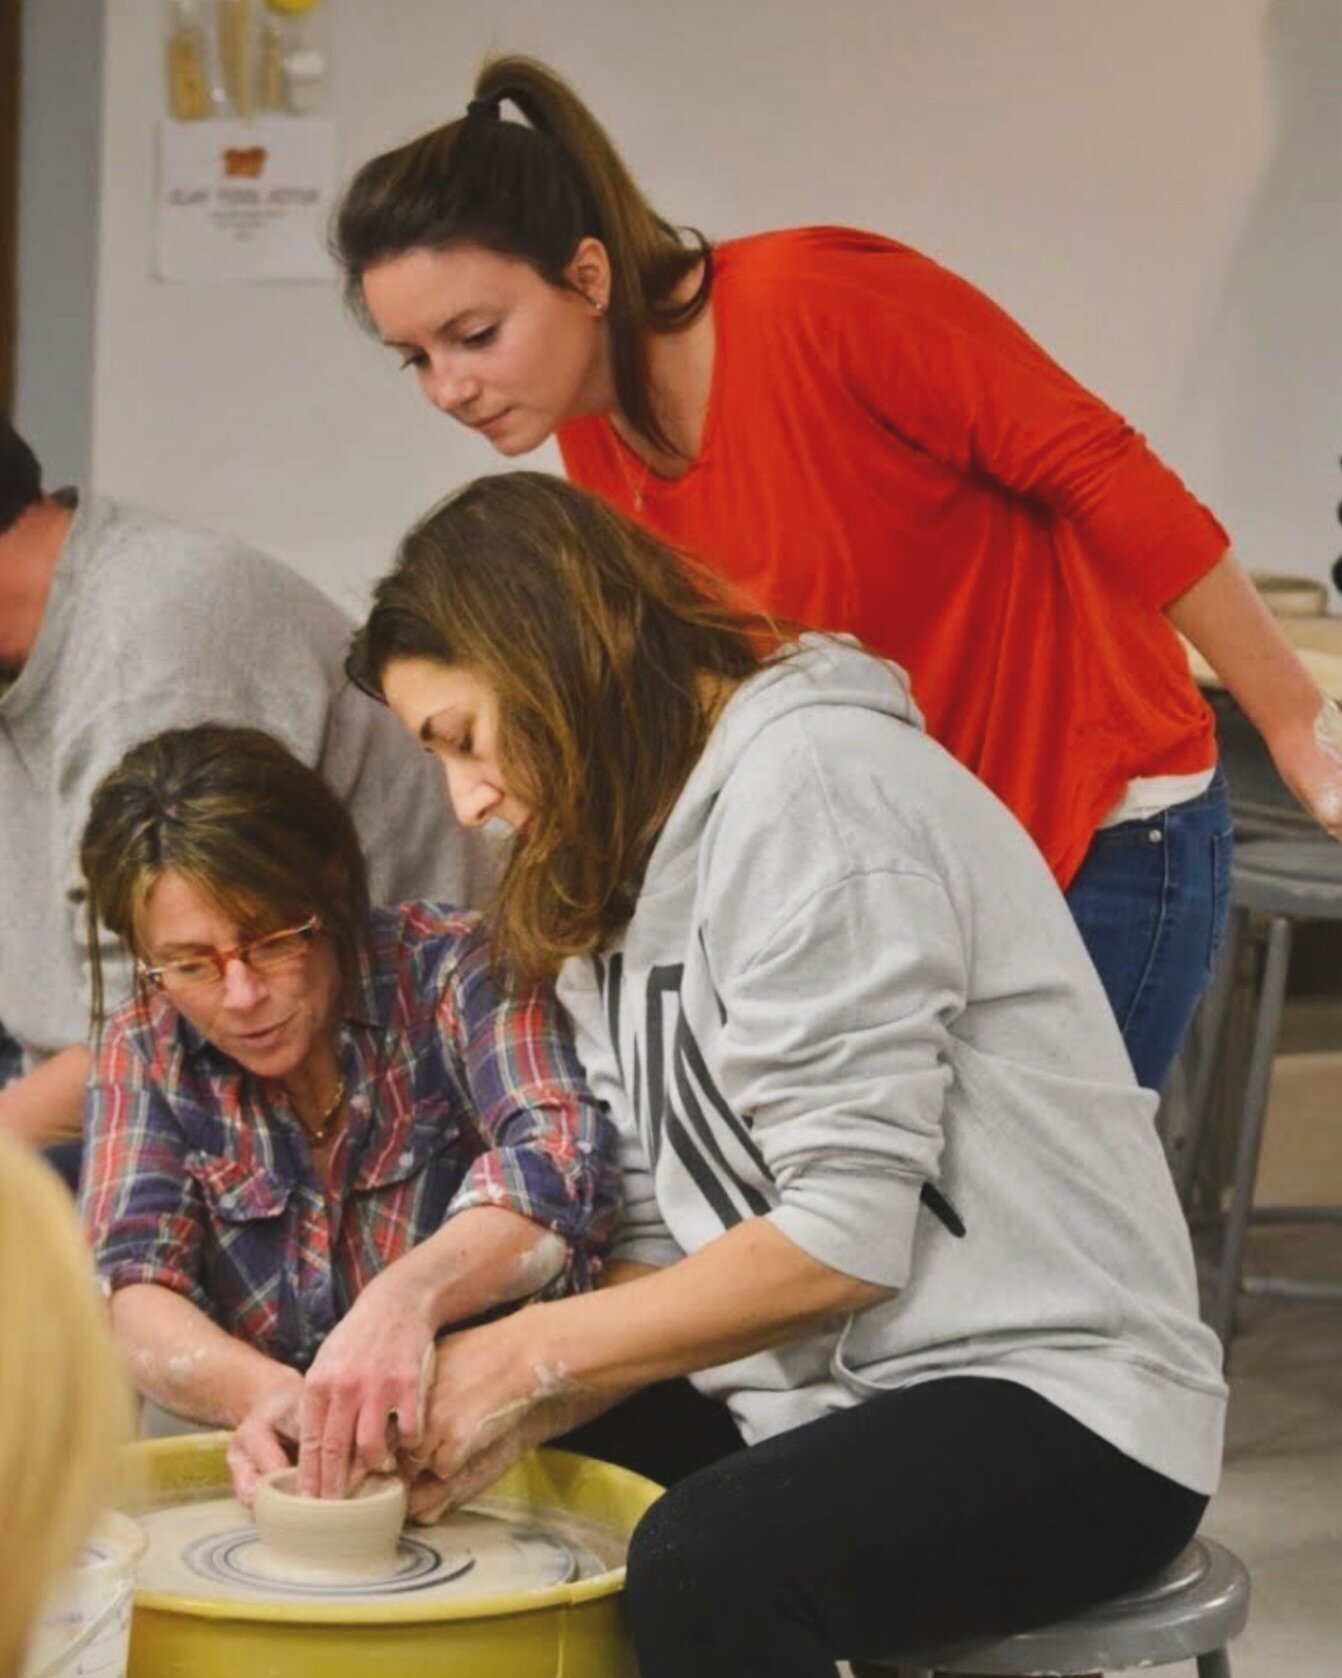 Looking to try something new with friends and fami? Or maybe you need a team building idea to encourage connections in the office? SCAC is here to help! Along with our regularly scheduled classes, we also host private parties and corporate clay team 